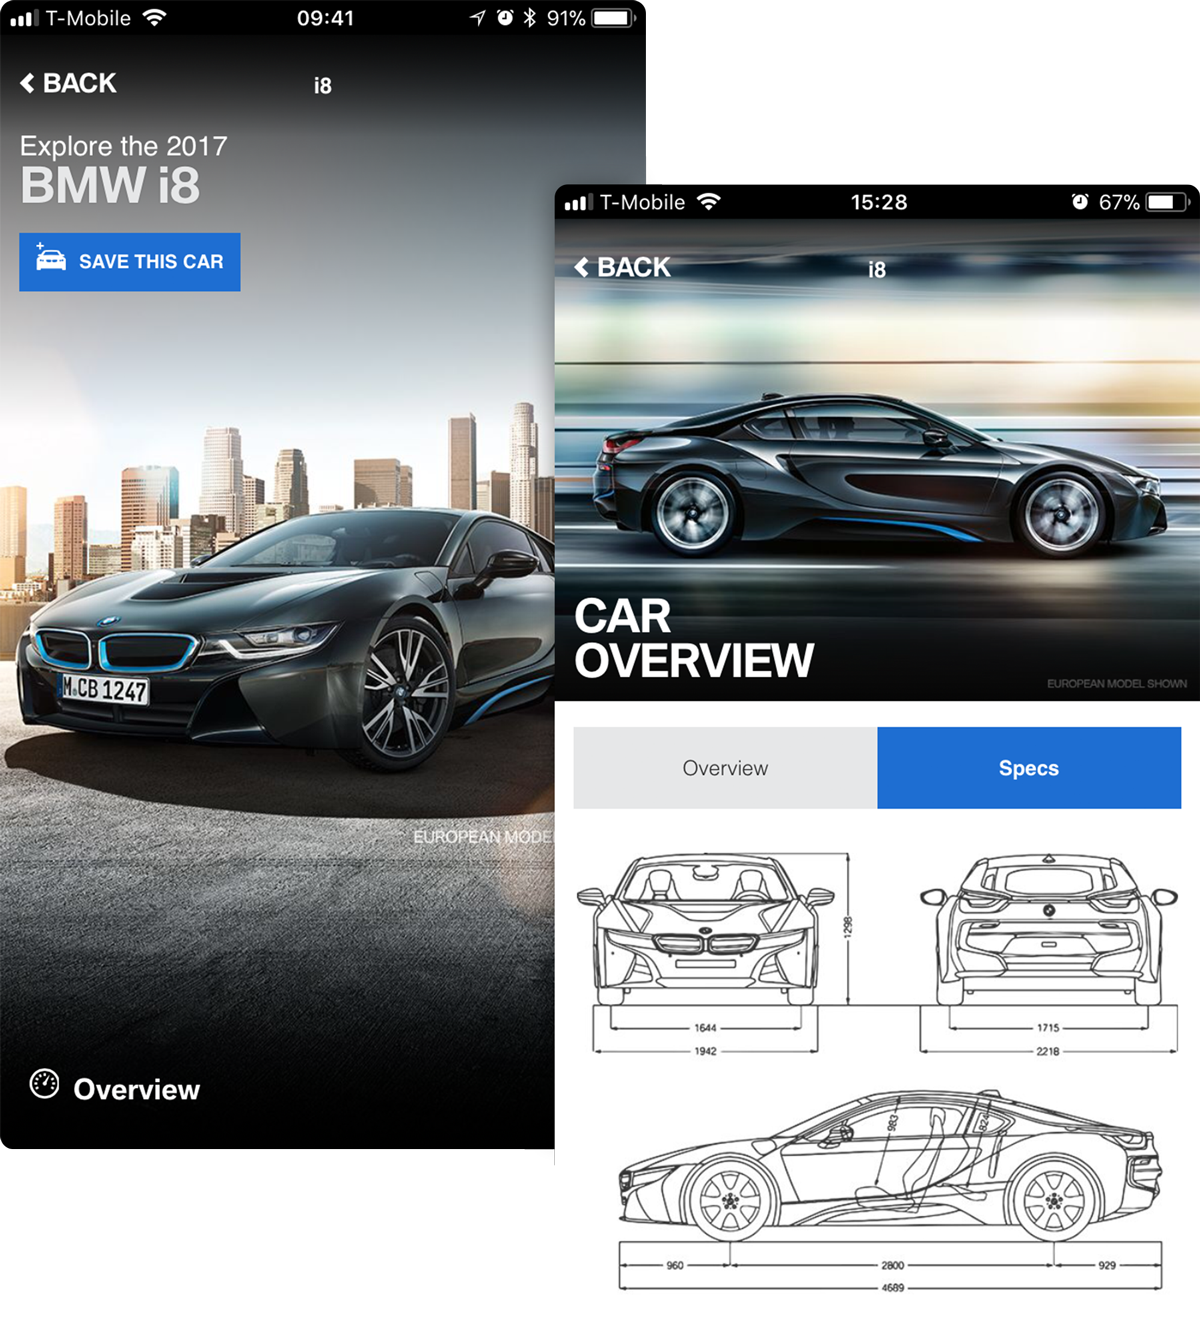 Two screenshots from the Genius App showcasing the i8 model and spec sheets showing it piece-by-piece.